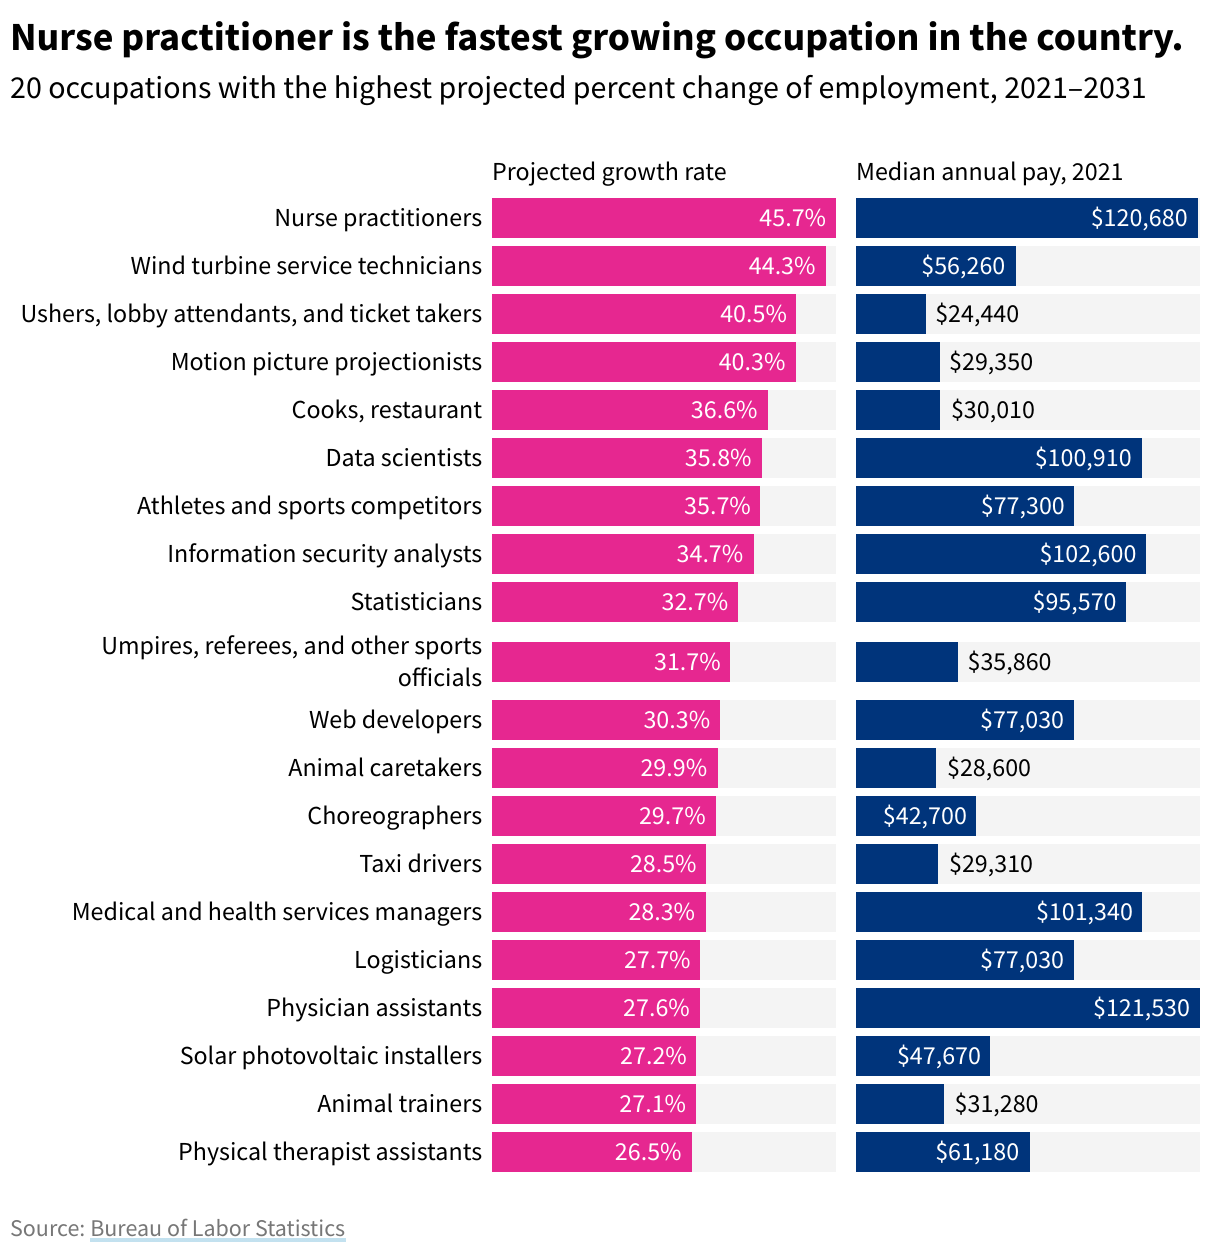 What are the fastest growing professions in America?